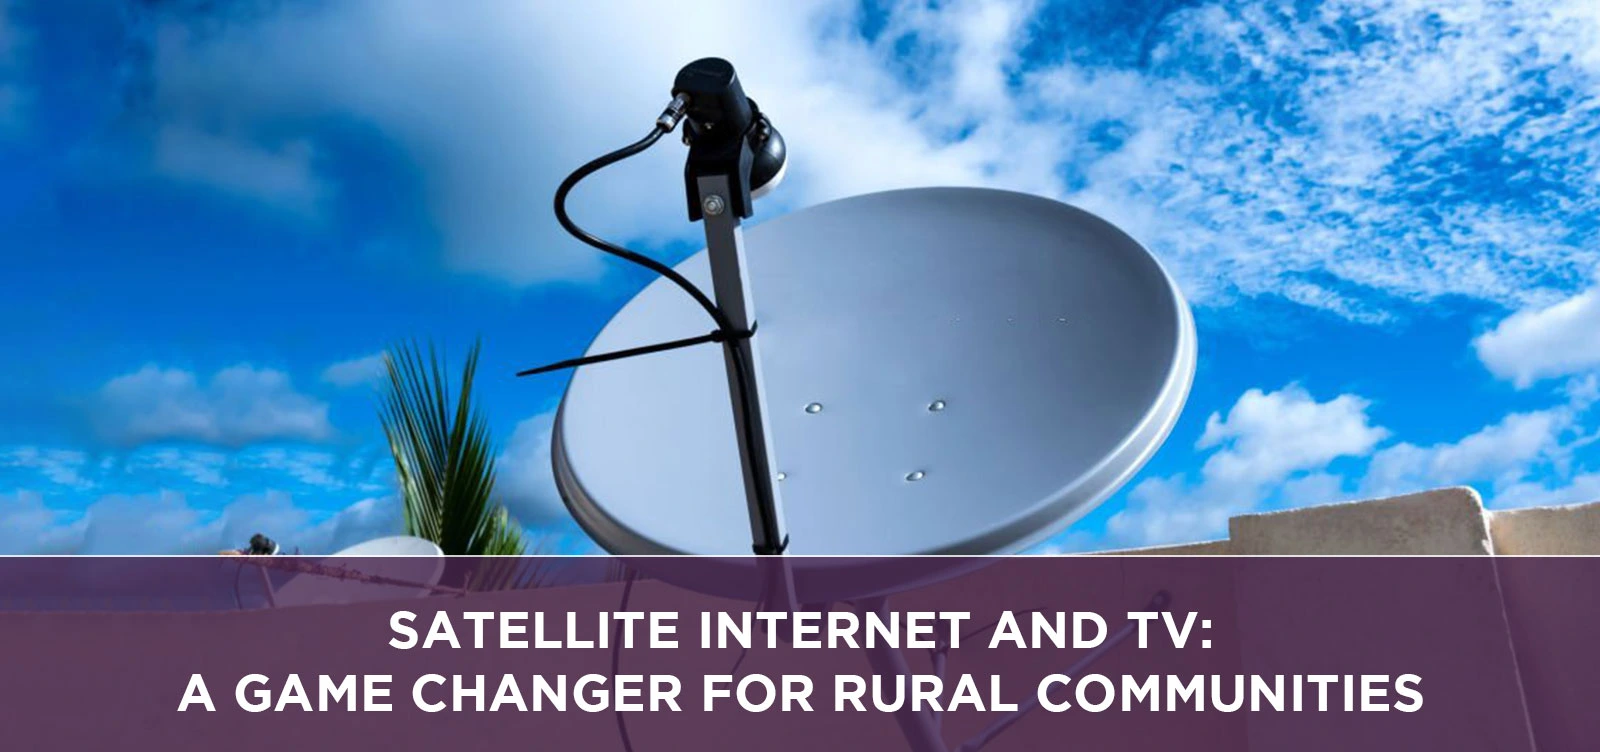 Satellite Internet and TV: A Game Changer for Rural Communities